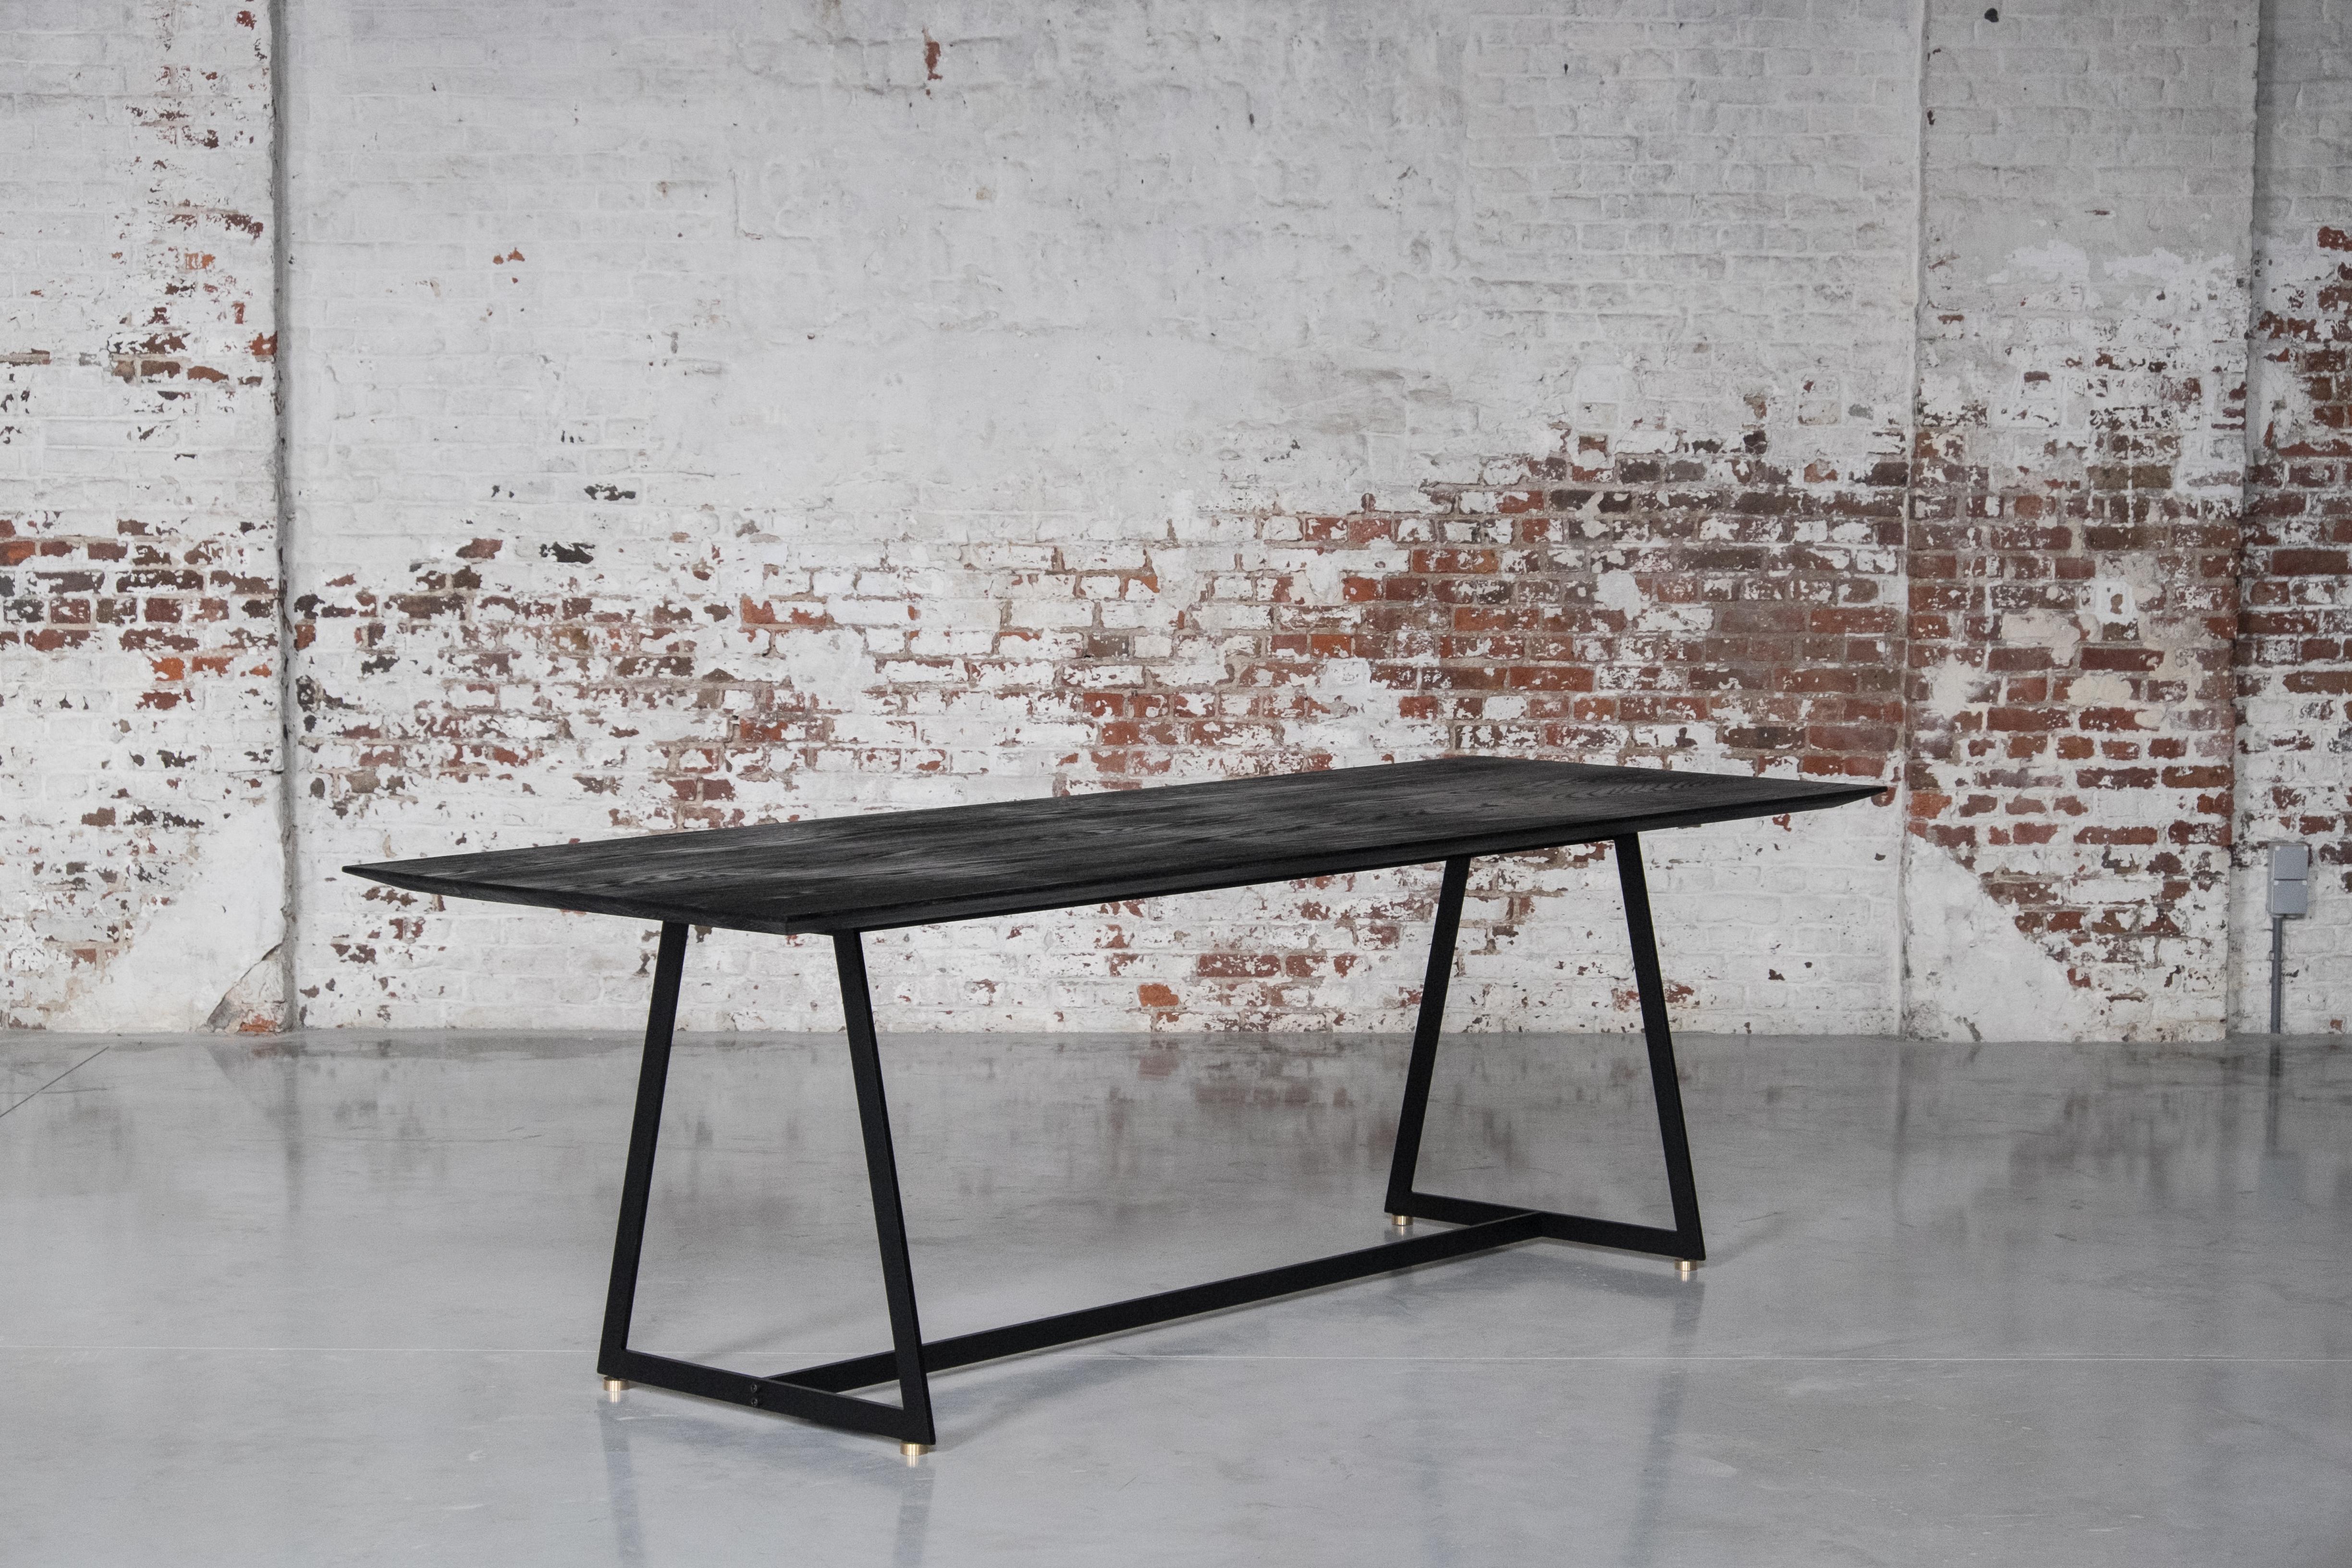 Basic dining table by Atelier Thomas Serruys
Dimensions: L 250 x W 85cm, H 75 cm
Materials: oak, steel, brass

Basic dining table
Fully demountable table with slim edged solid oak top, powder coated frame in cold drawn steel and adjustable